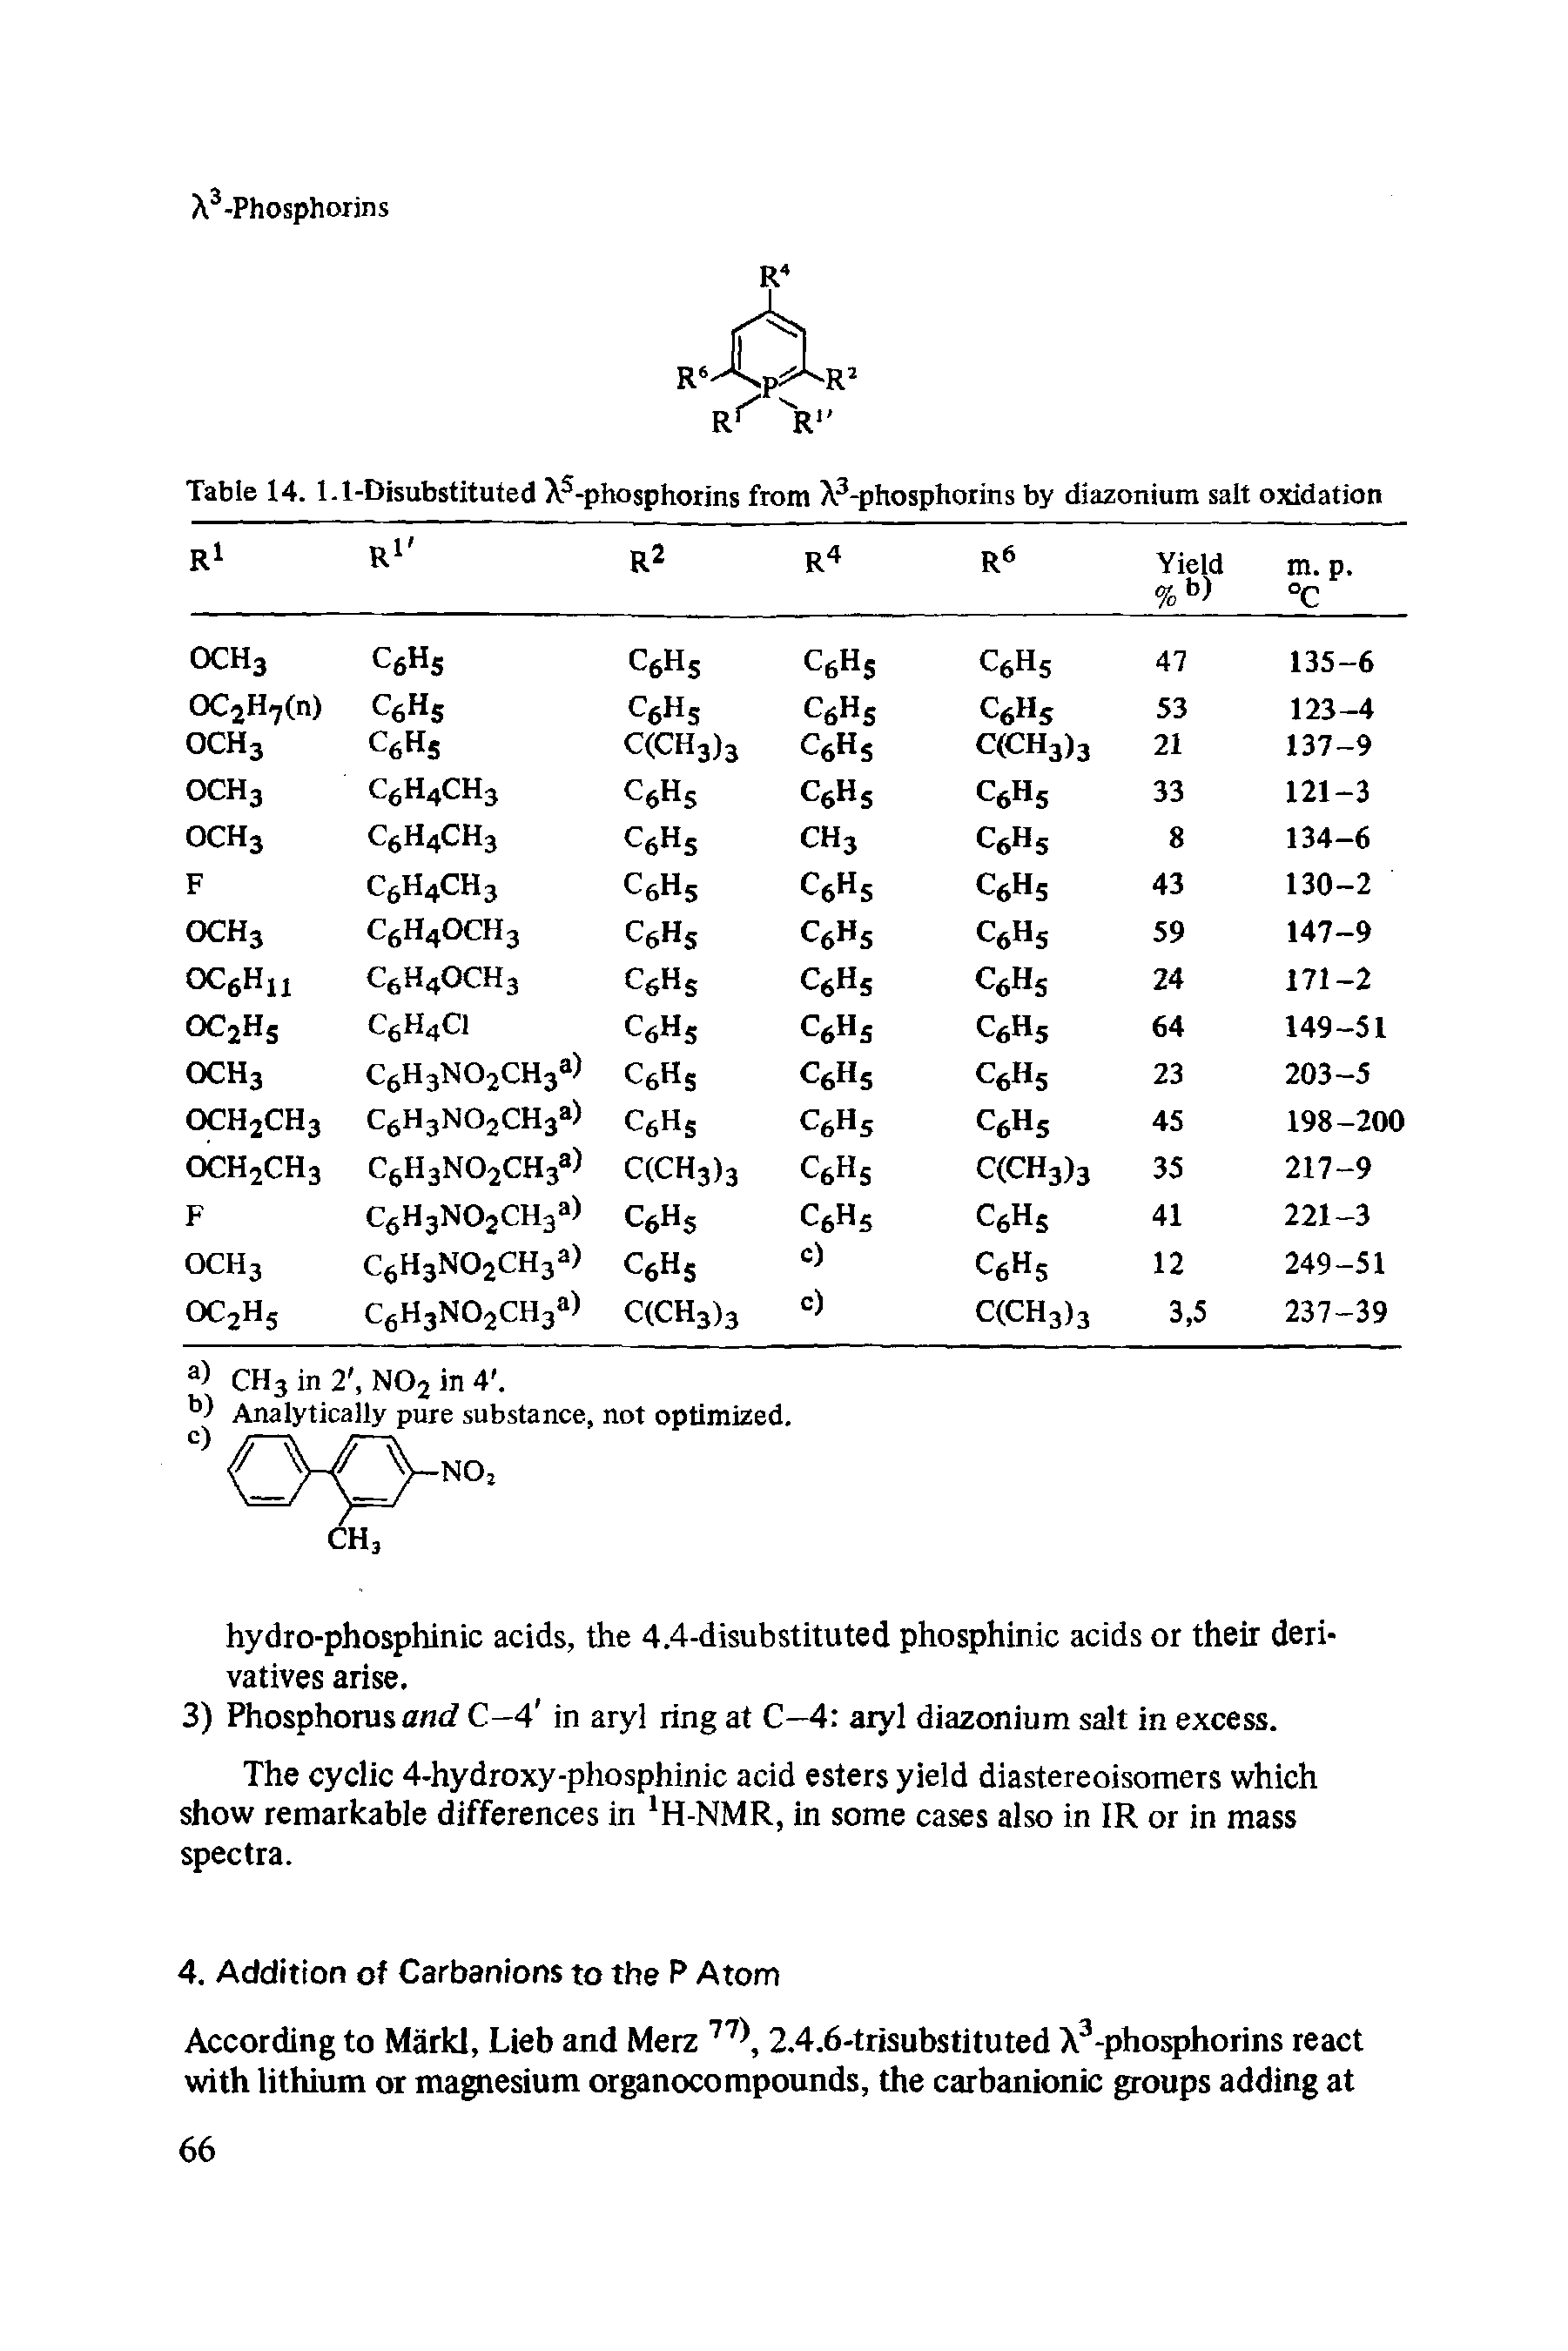 Table 14. 1.1-Disubstituted X -phosphorins from X -phosphorins by diazonium salt oxidation...